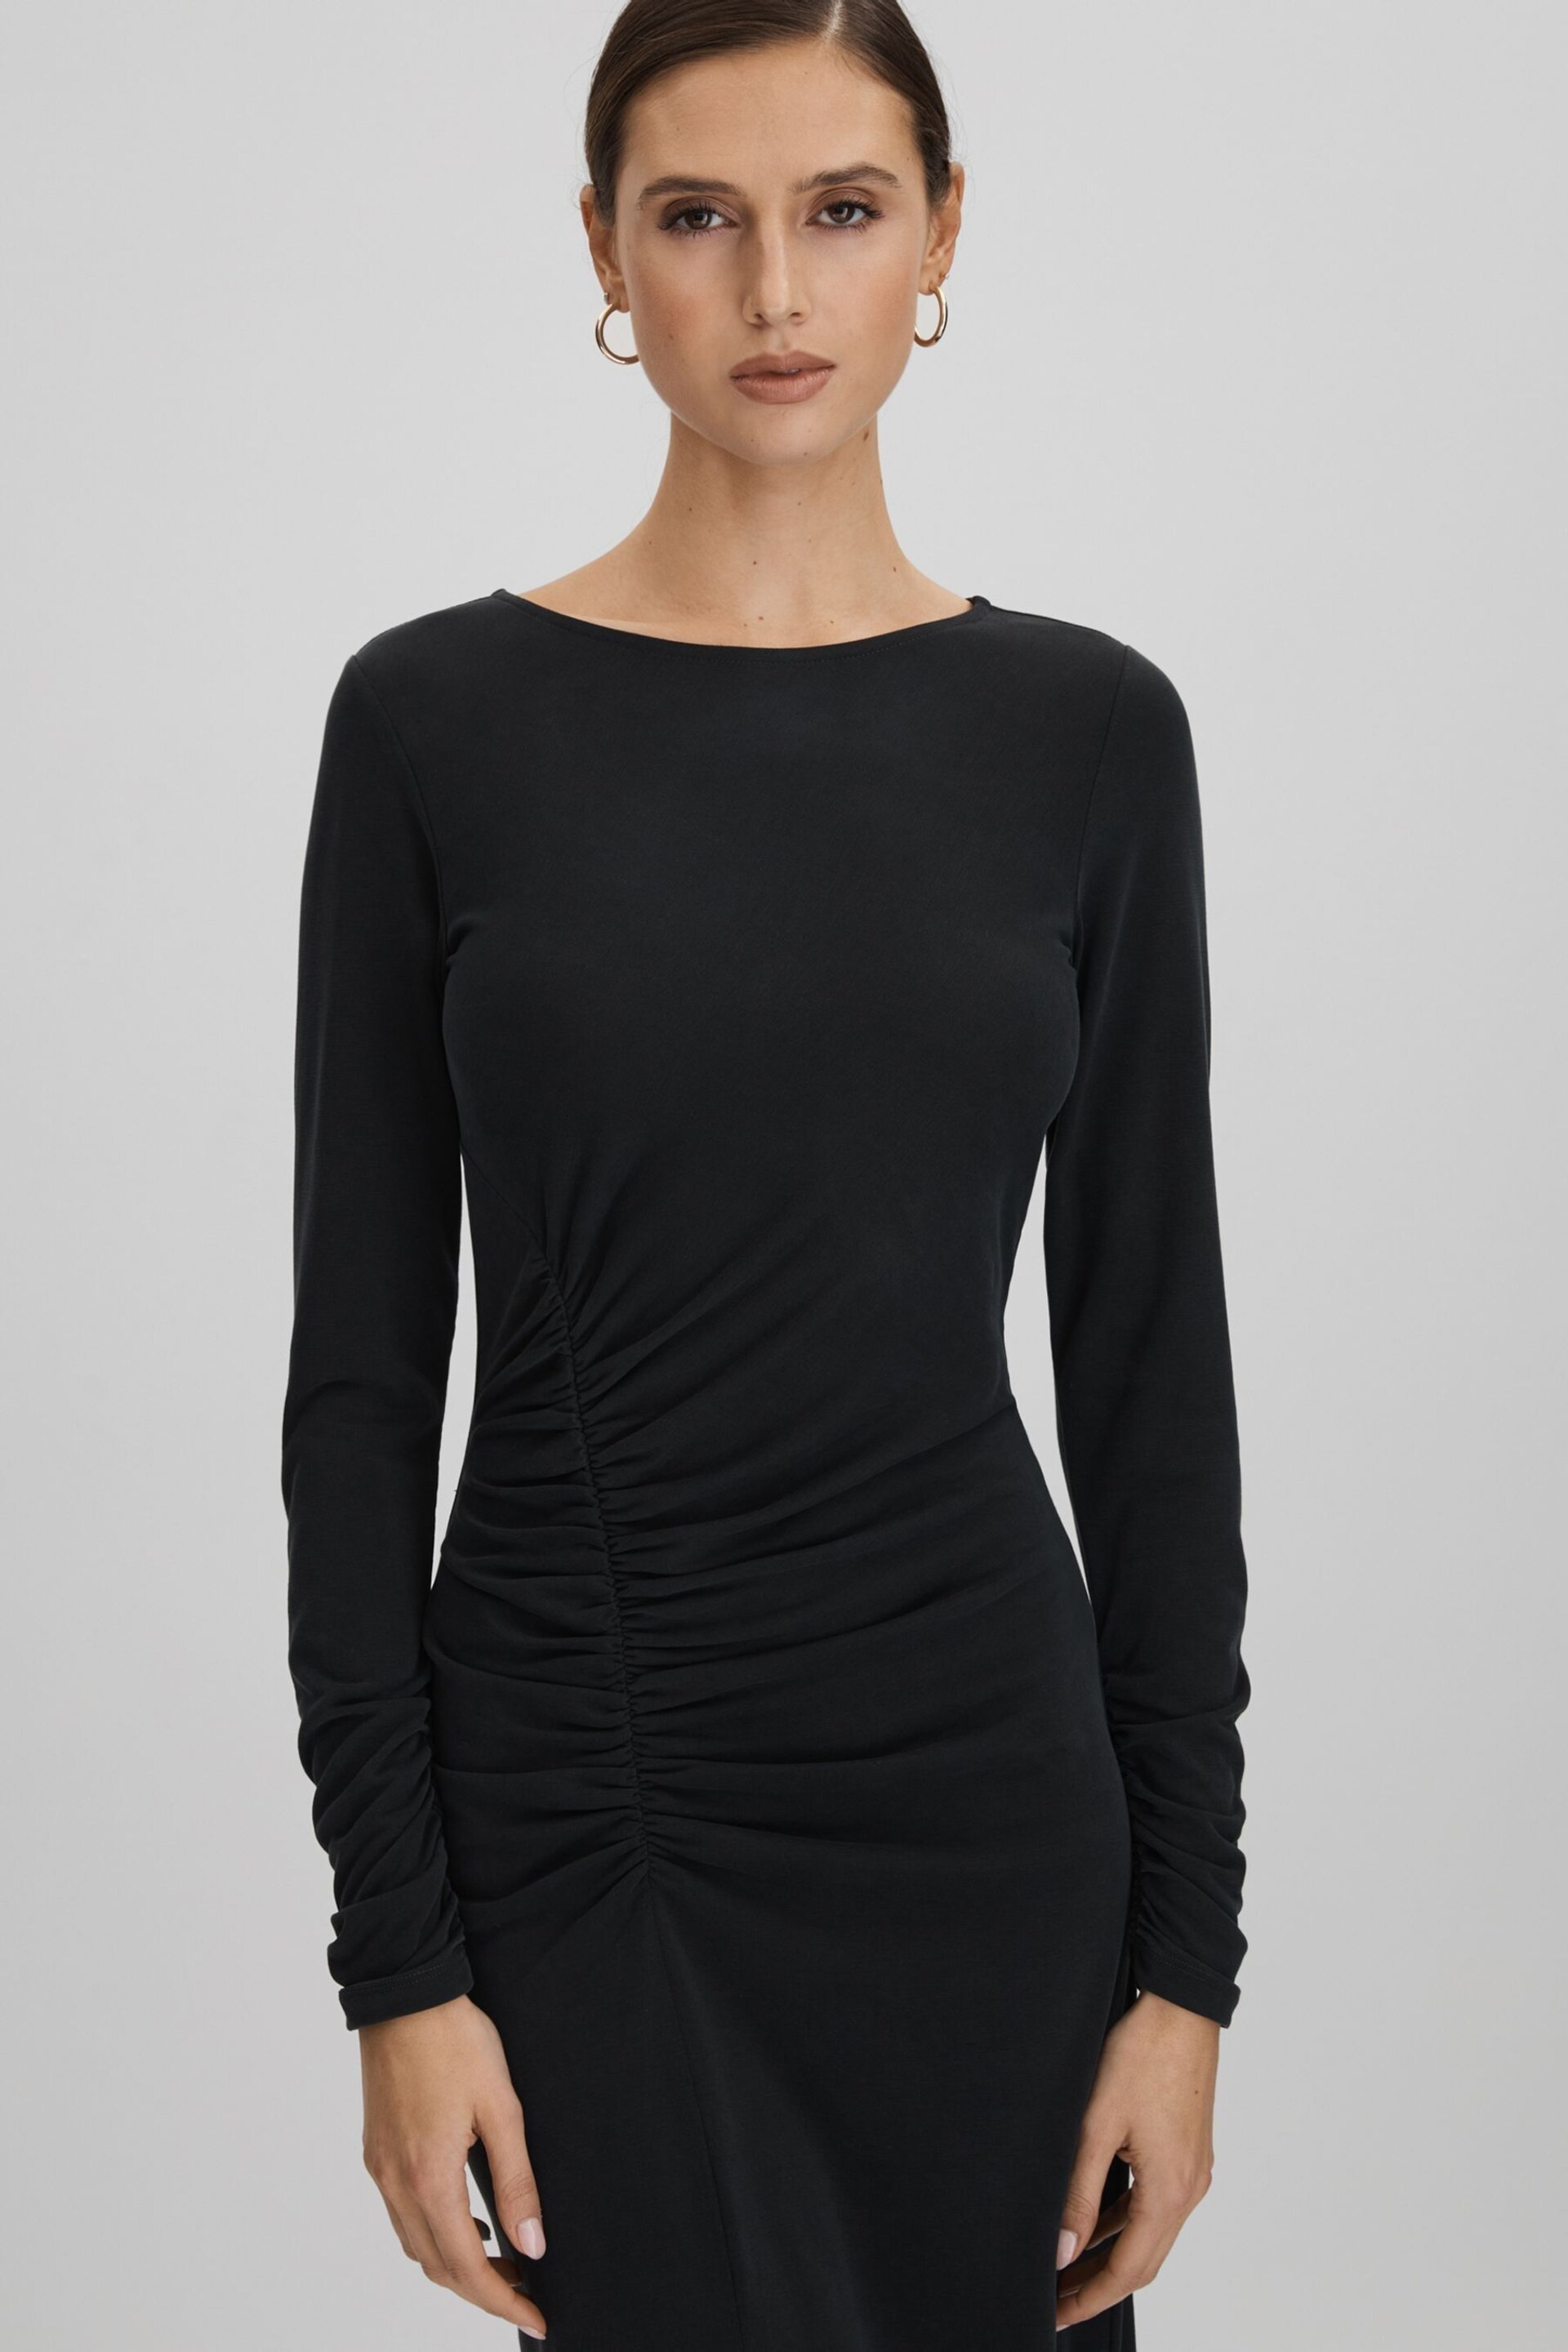 Reiss Charcoal Lana Ruched Jersey Midi Dress - Image 3 of 6